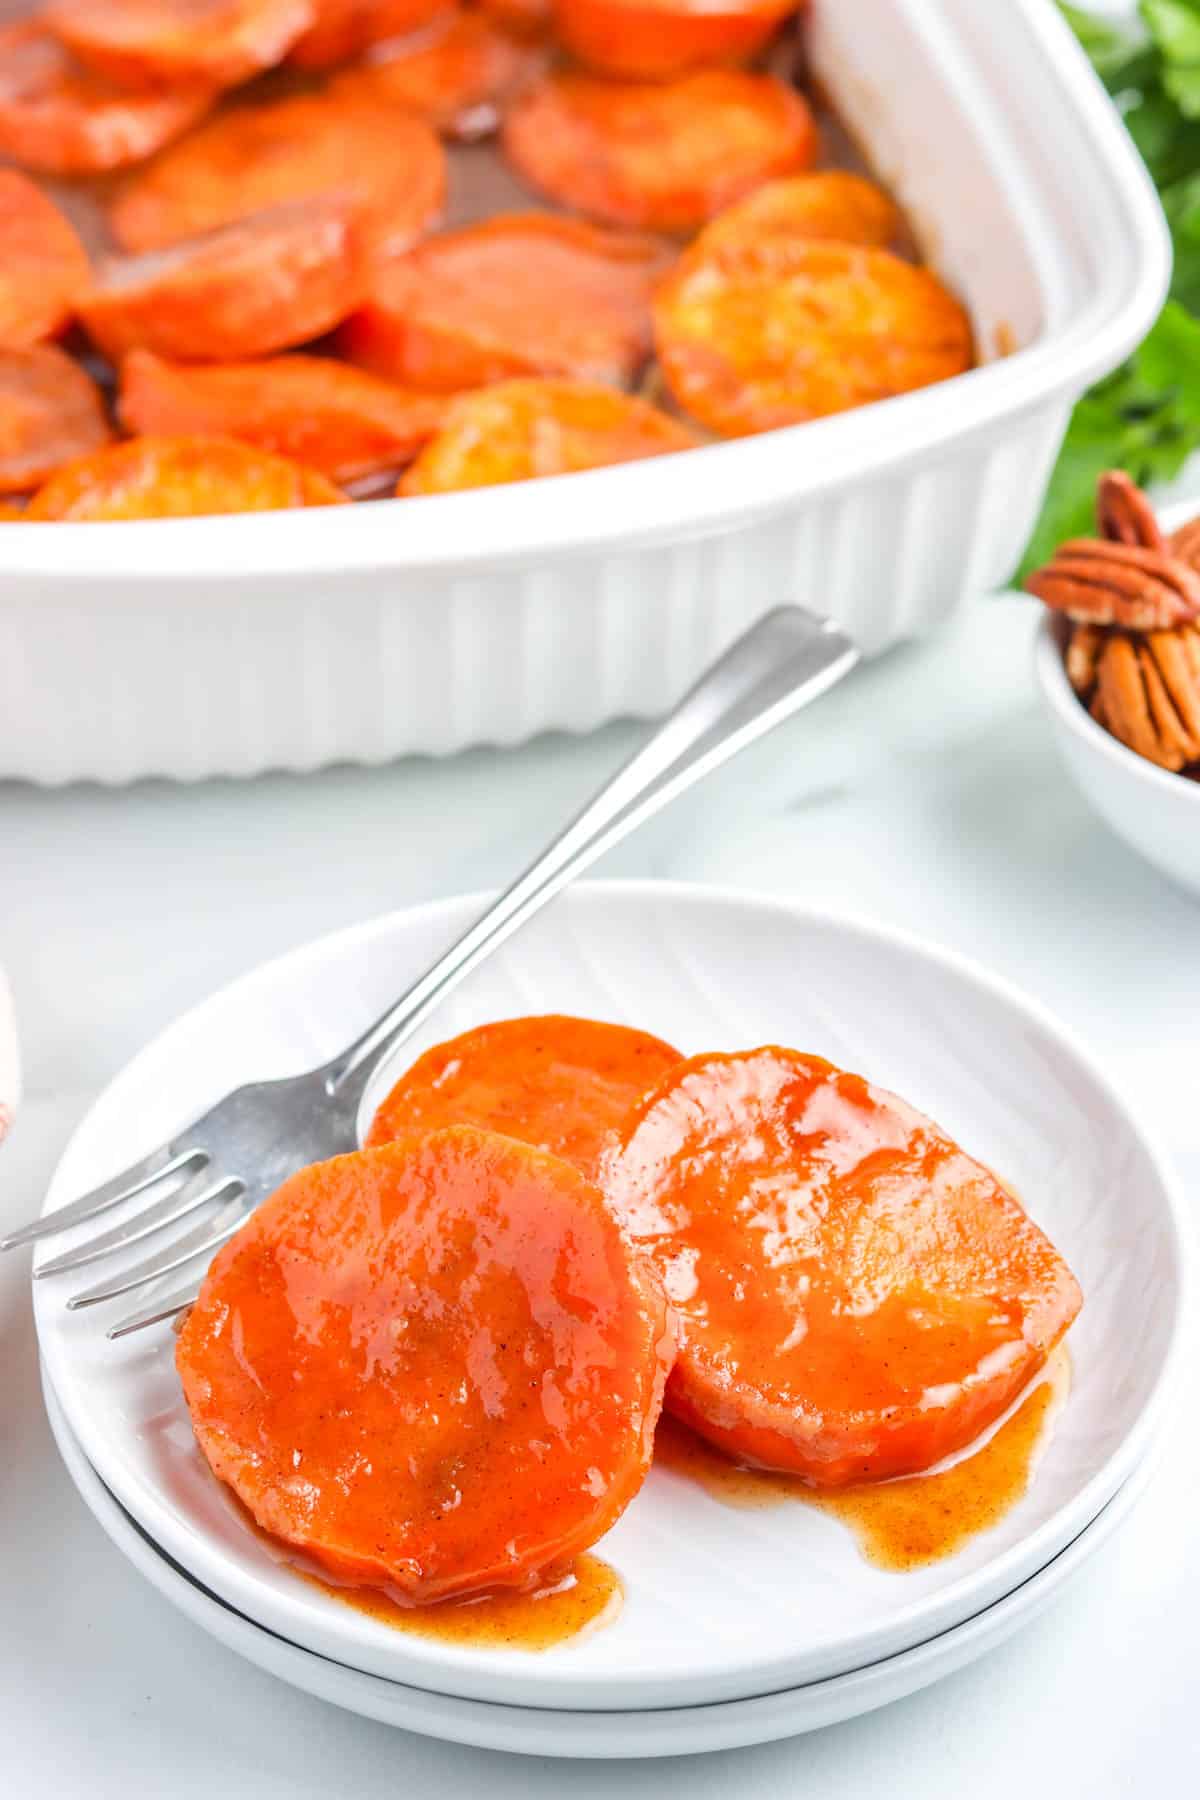 Some slices of the finished Southern candied yams recipe on a white plate with a fork.